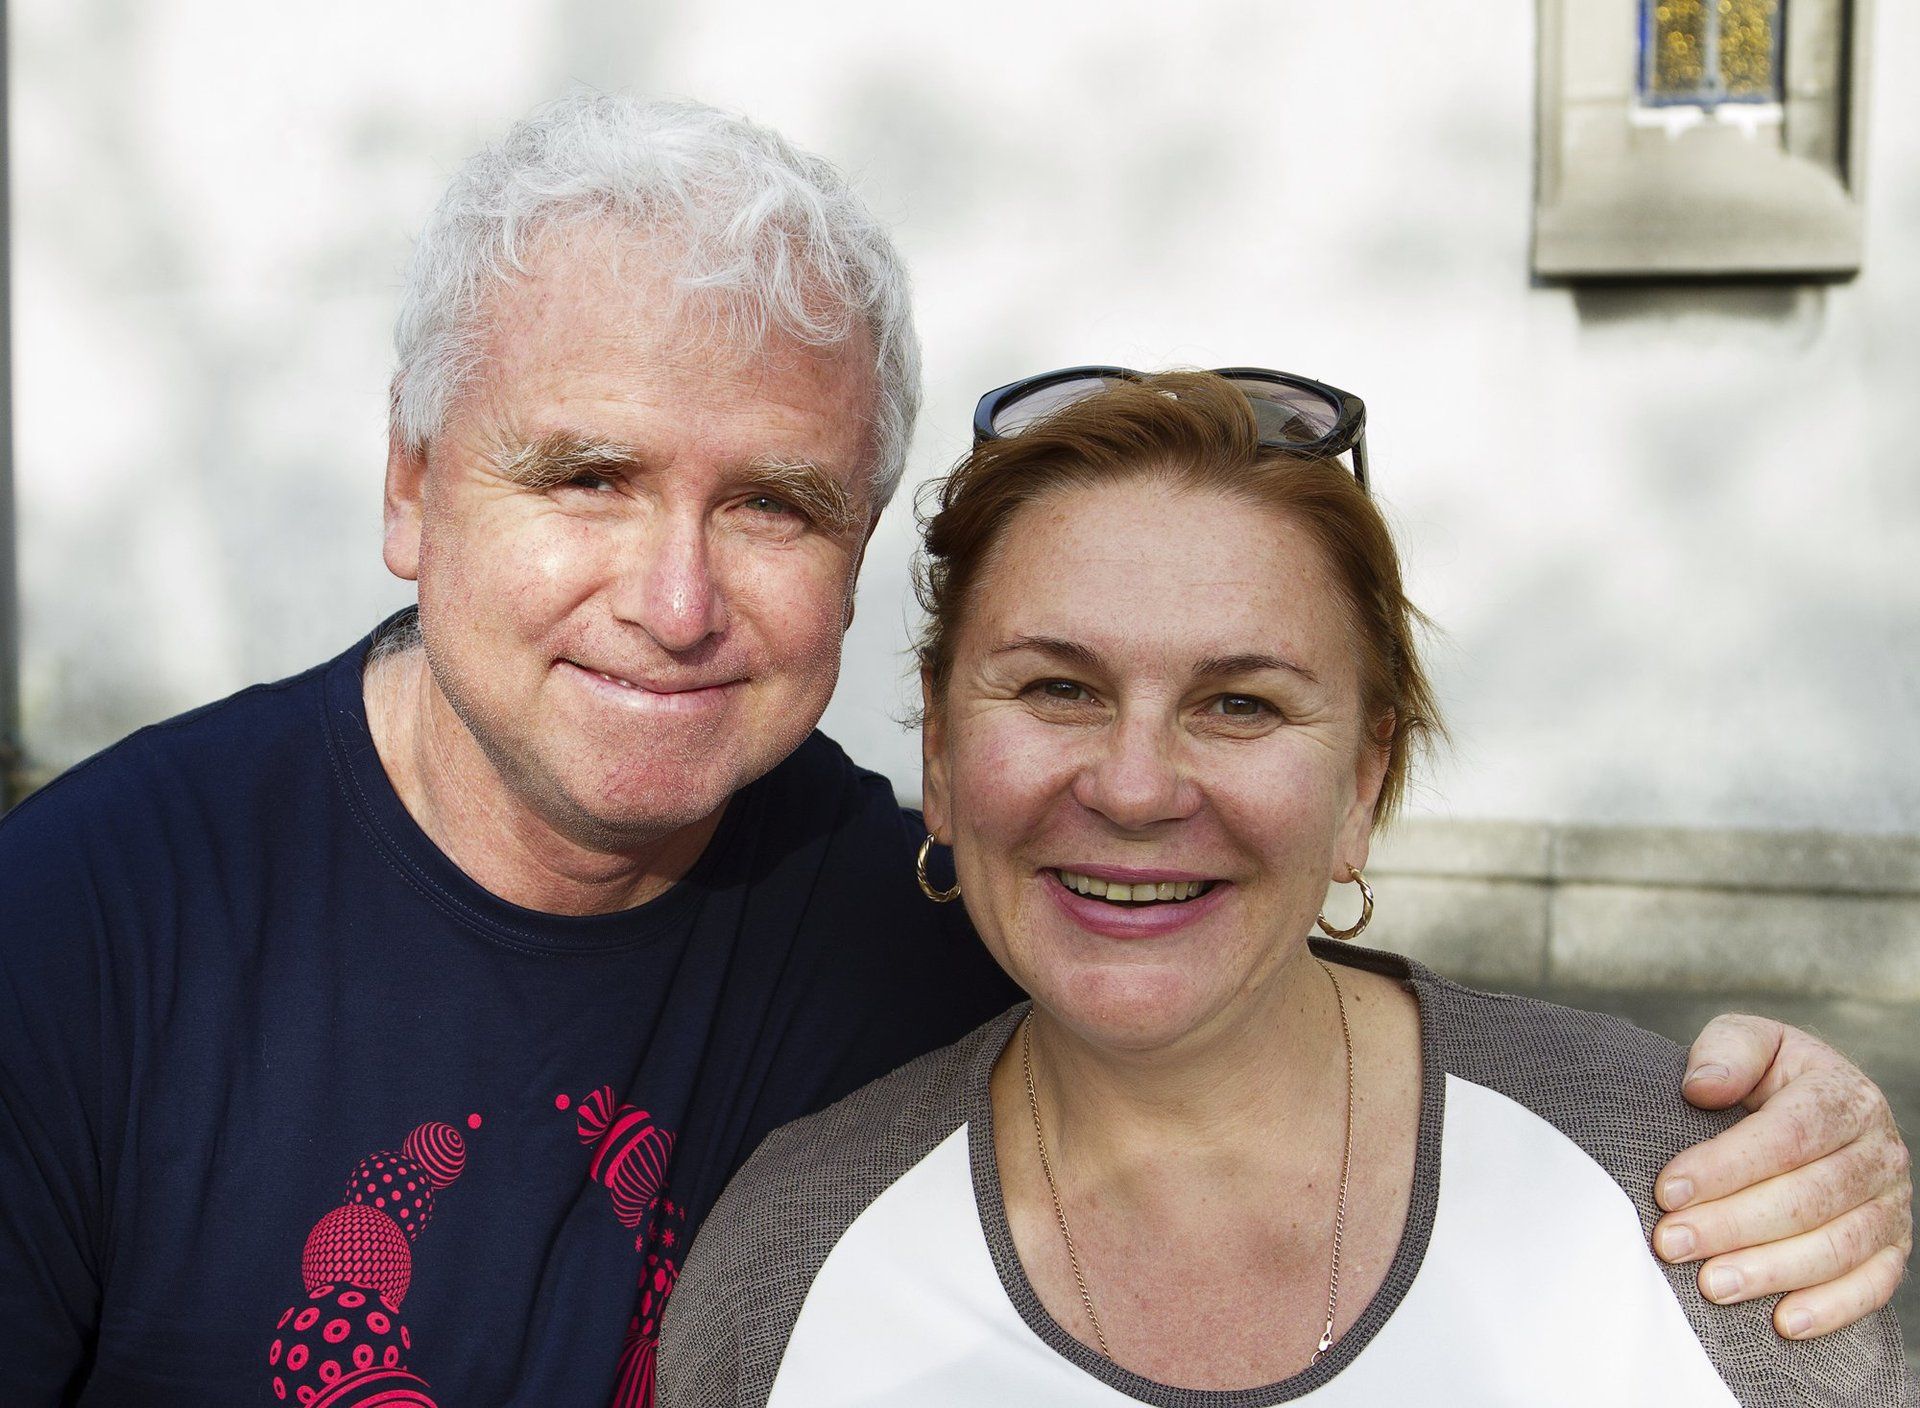 A man and a woman are posing for a picture and smiling for the camera.